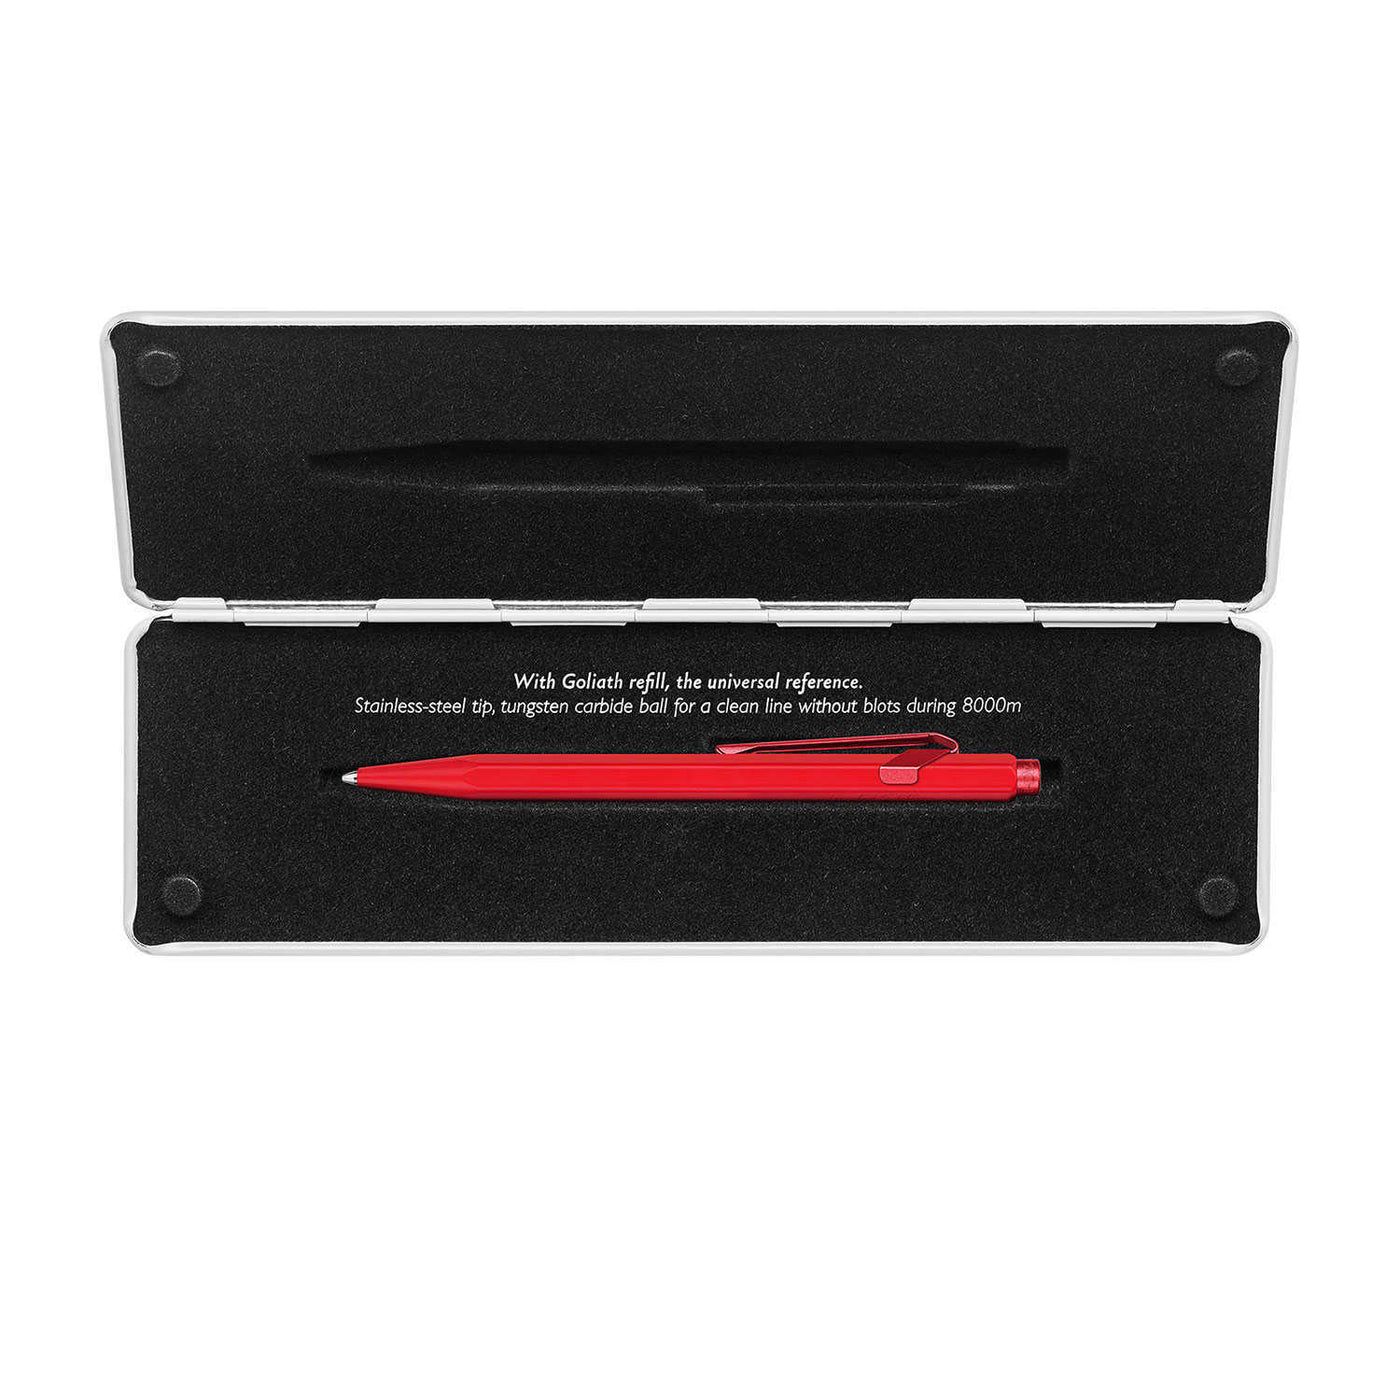 Caran d'Ache 849 Claim Your Style Ball Pen - Scarlet Red (Limited Edition) 4